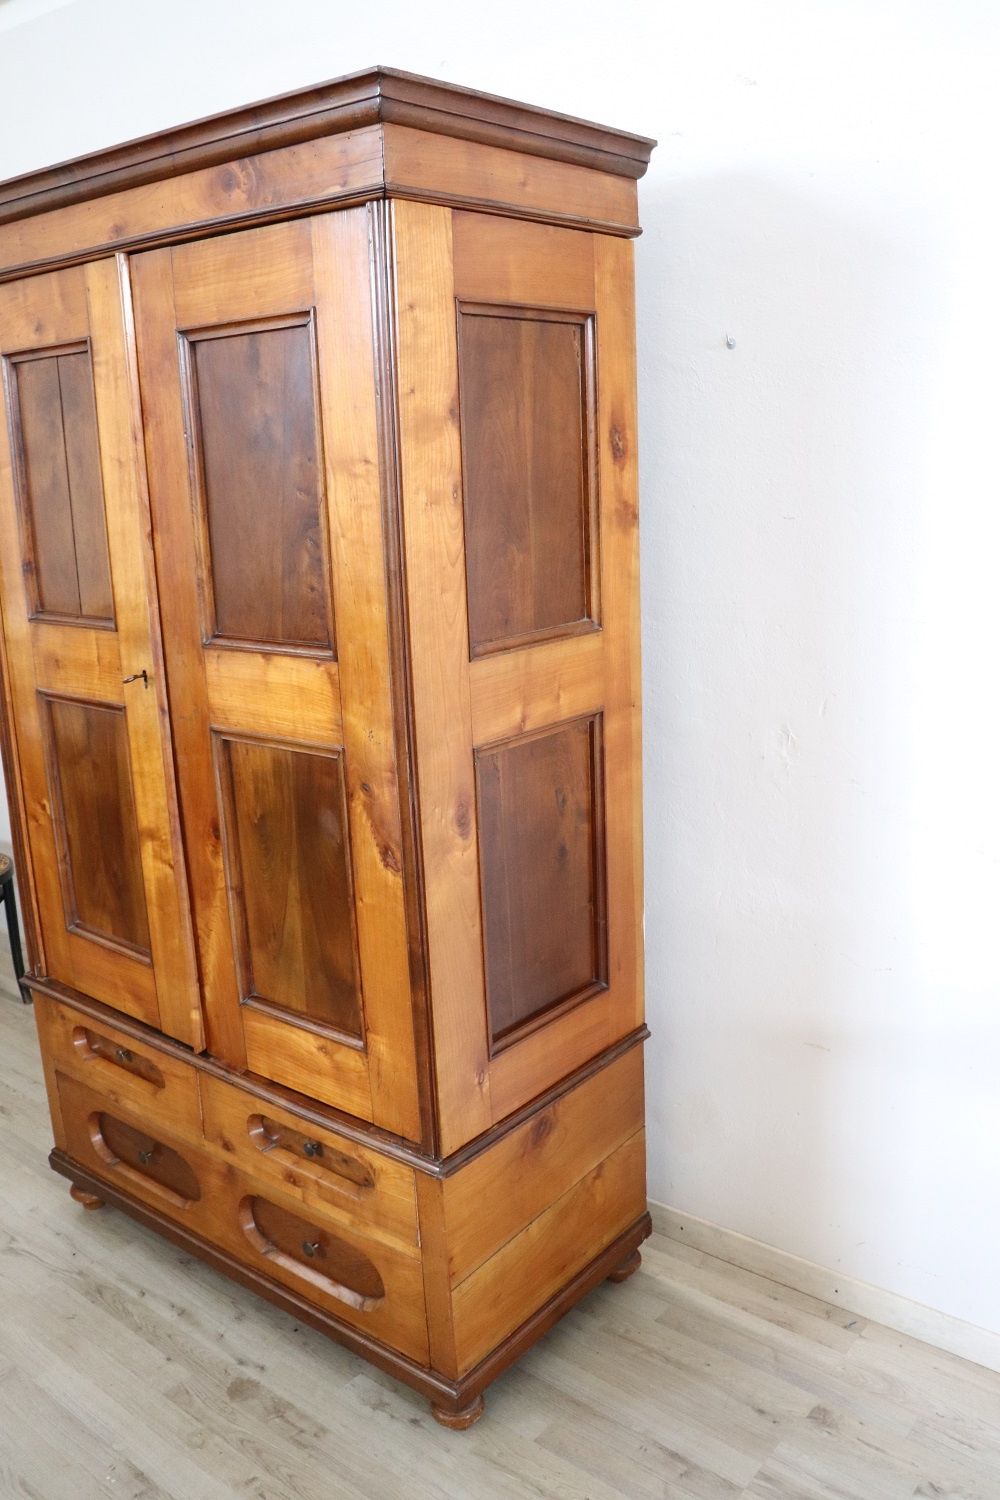 Furniture Of The Past – Antique Wardrobe In Walnut And Solid Cherry, Xix  Century Regarding Antique Wardrobes (Gallery 6 of 20)